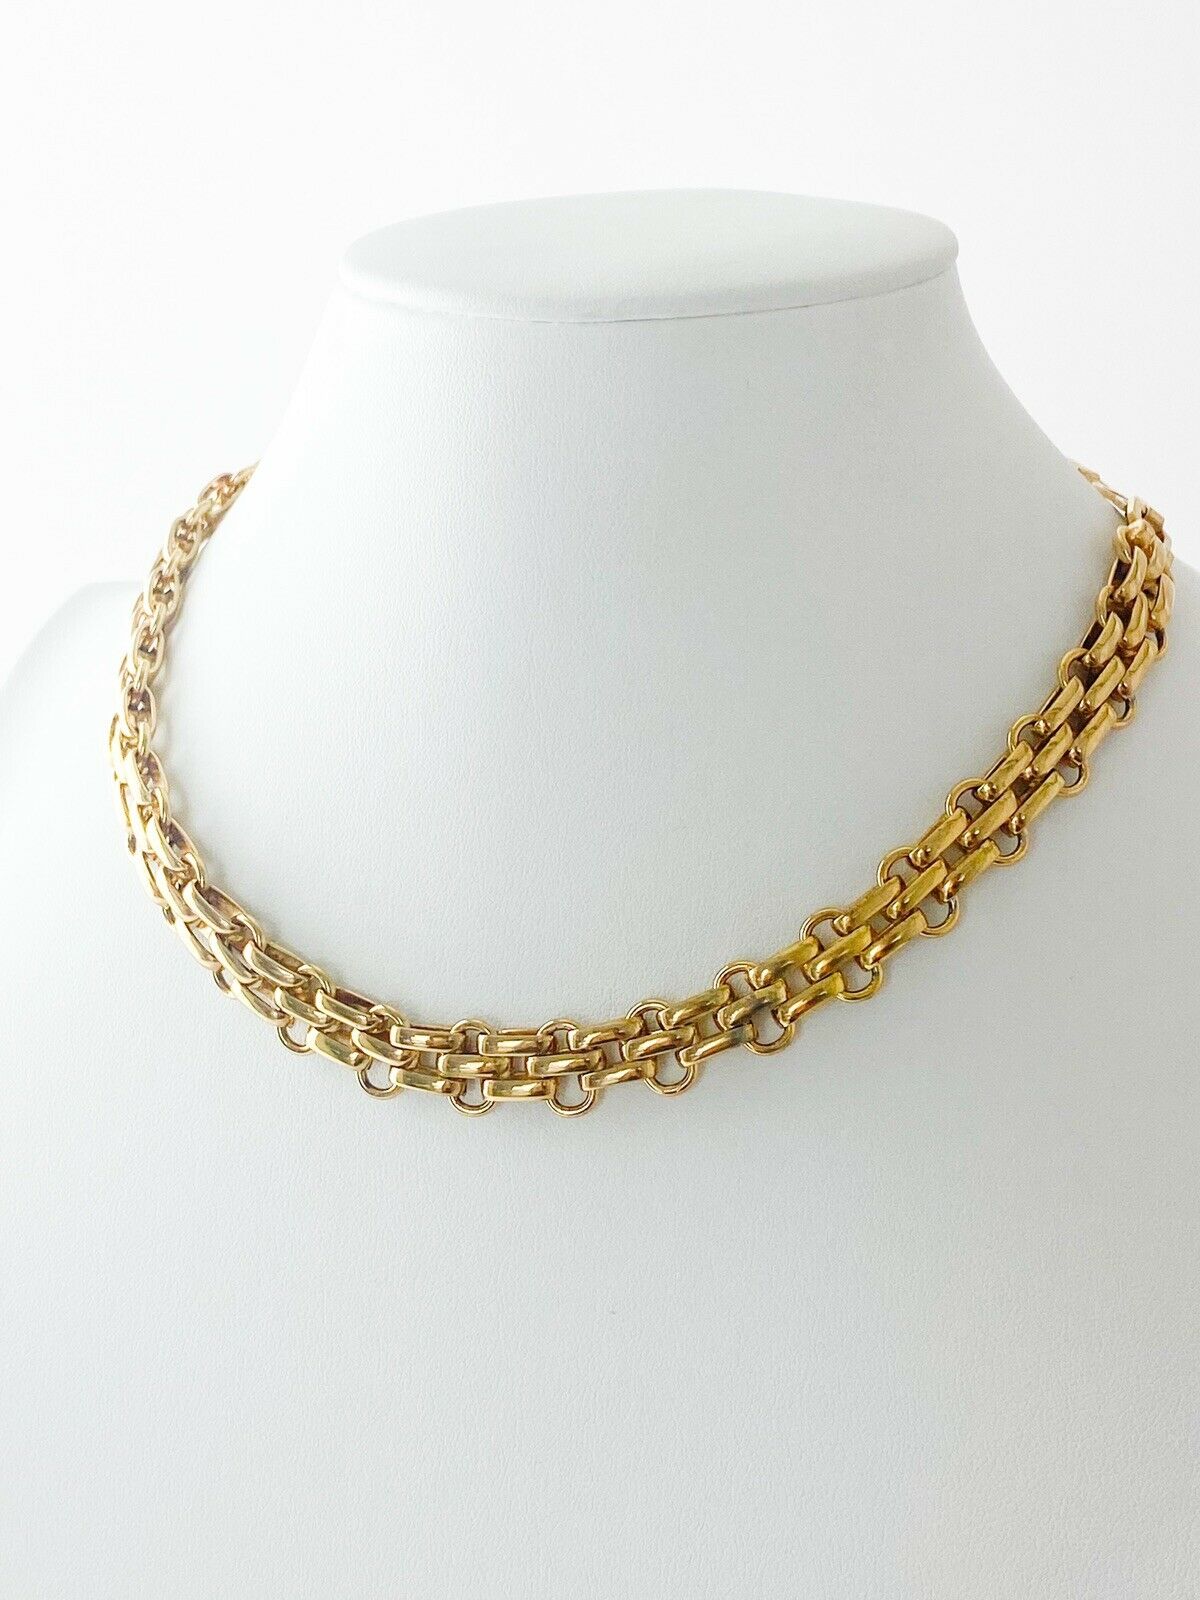 Christian Dior Gold Tone Vintage Beautiful Choker Chain Necklace